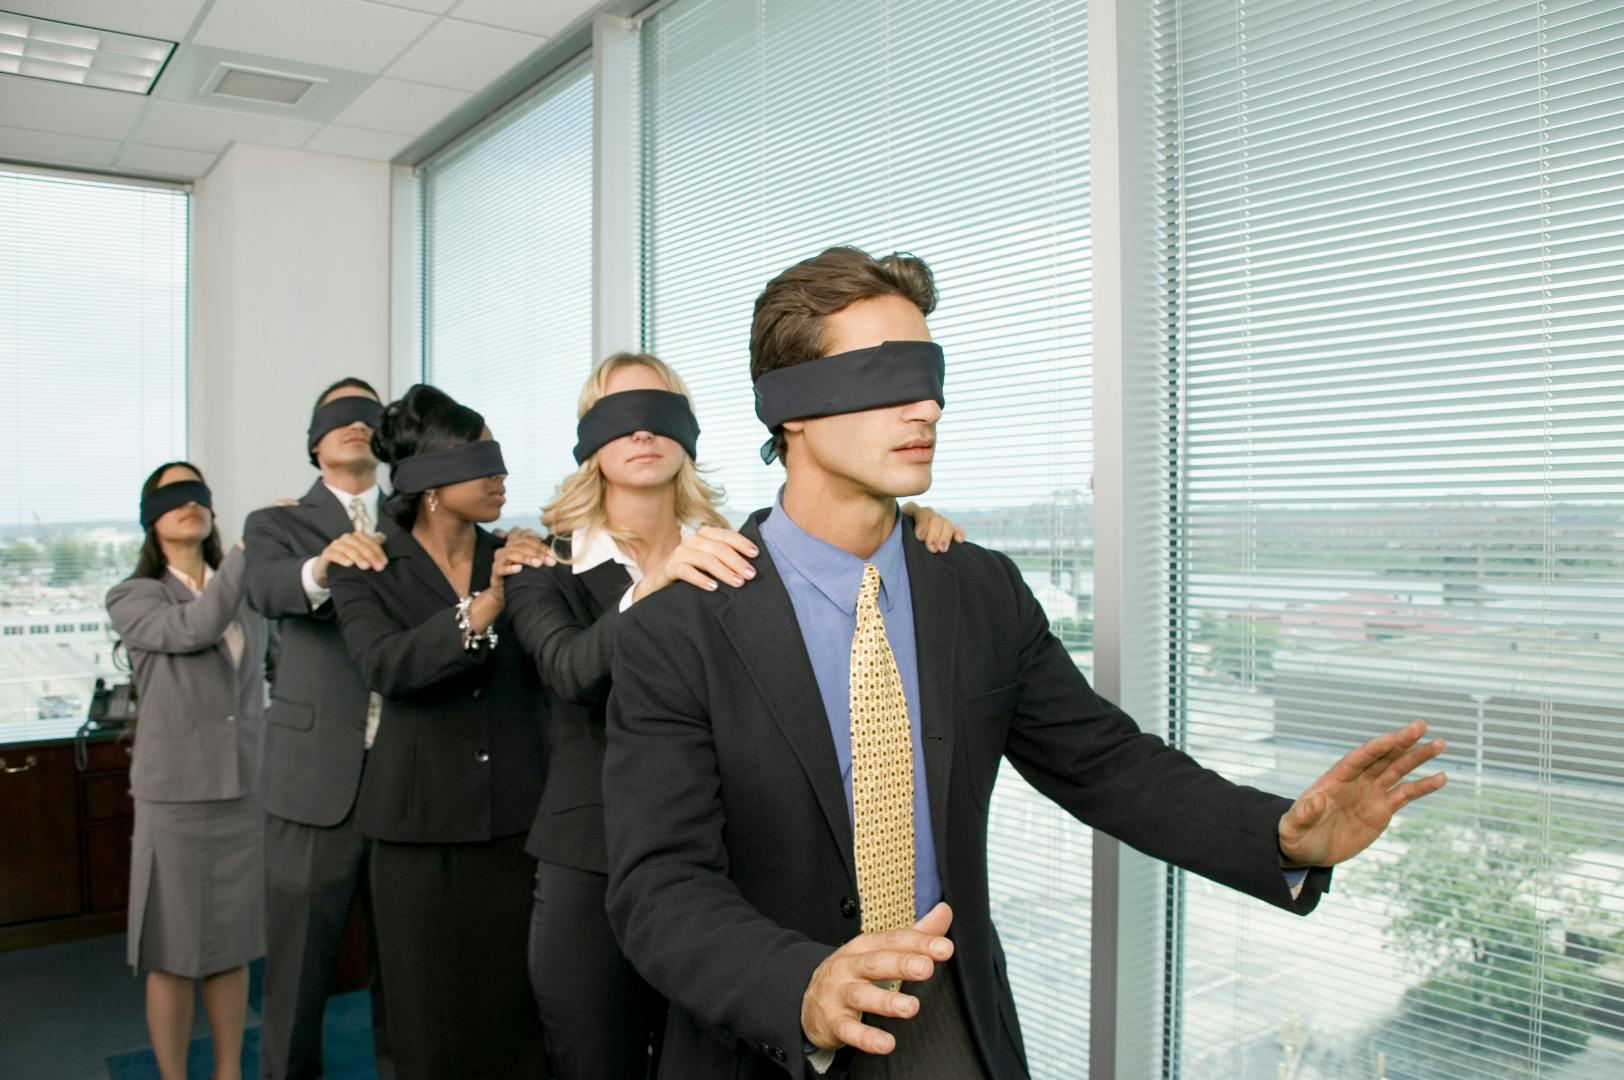 Colleagues playing a blindfolded game